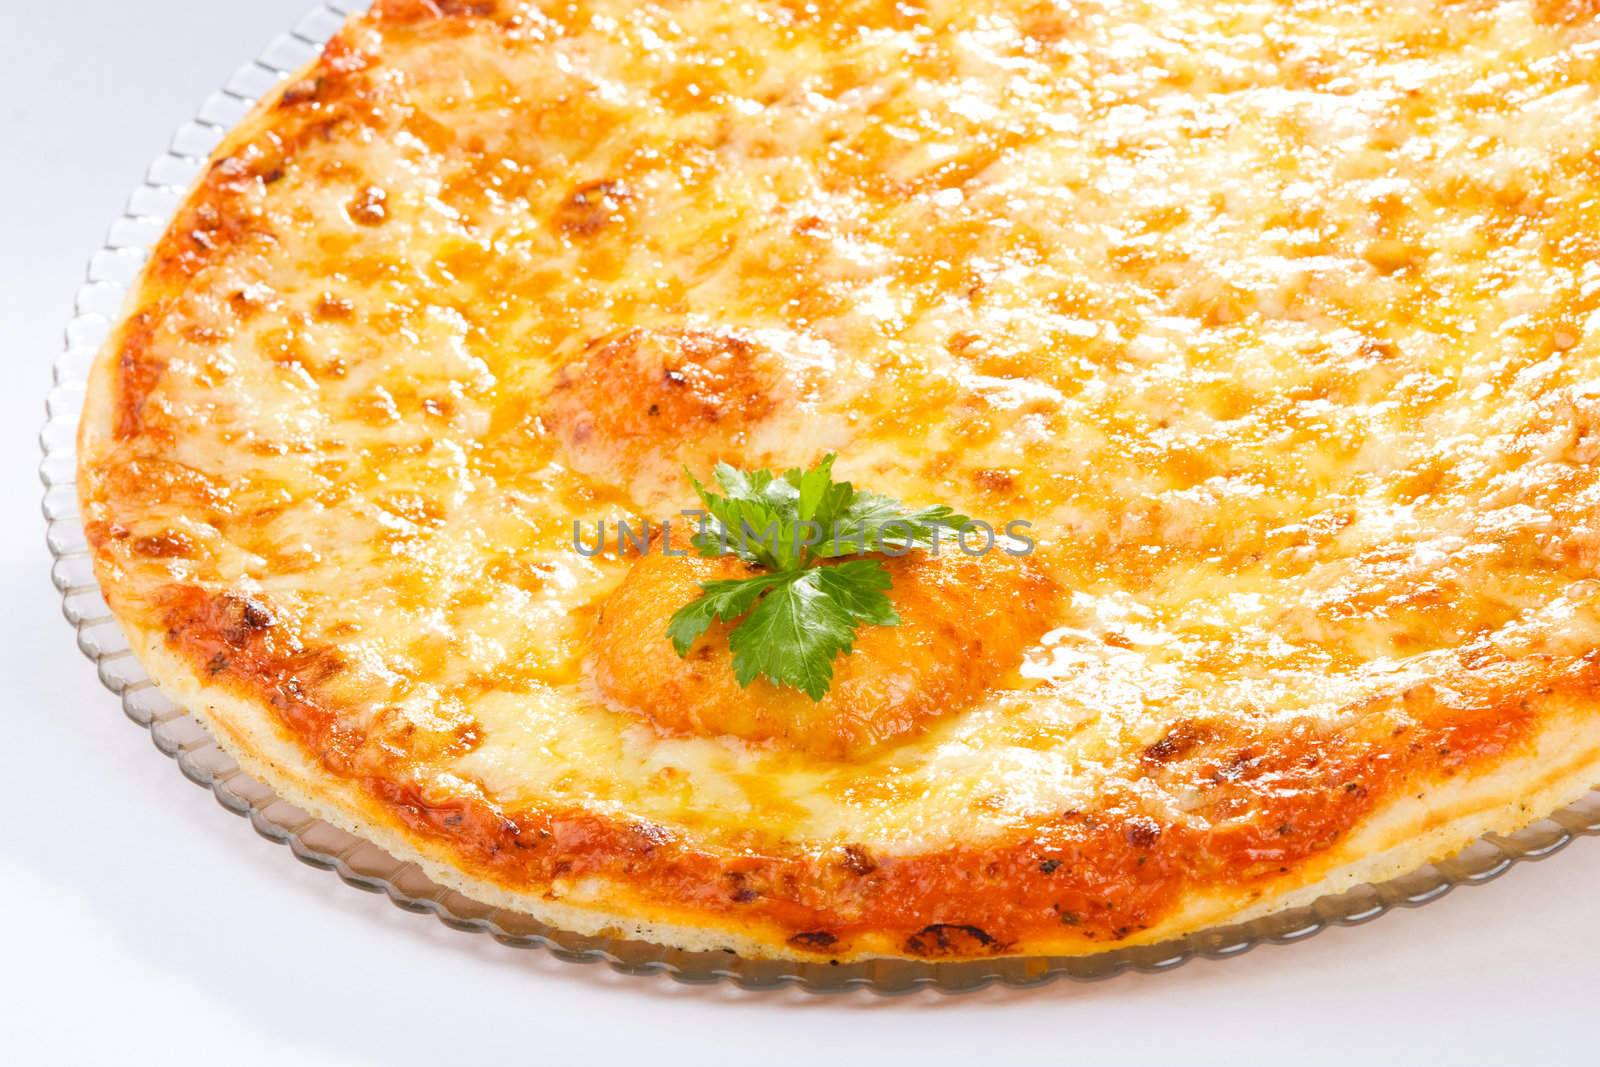 Four Cheeses Pizza by vsurkov